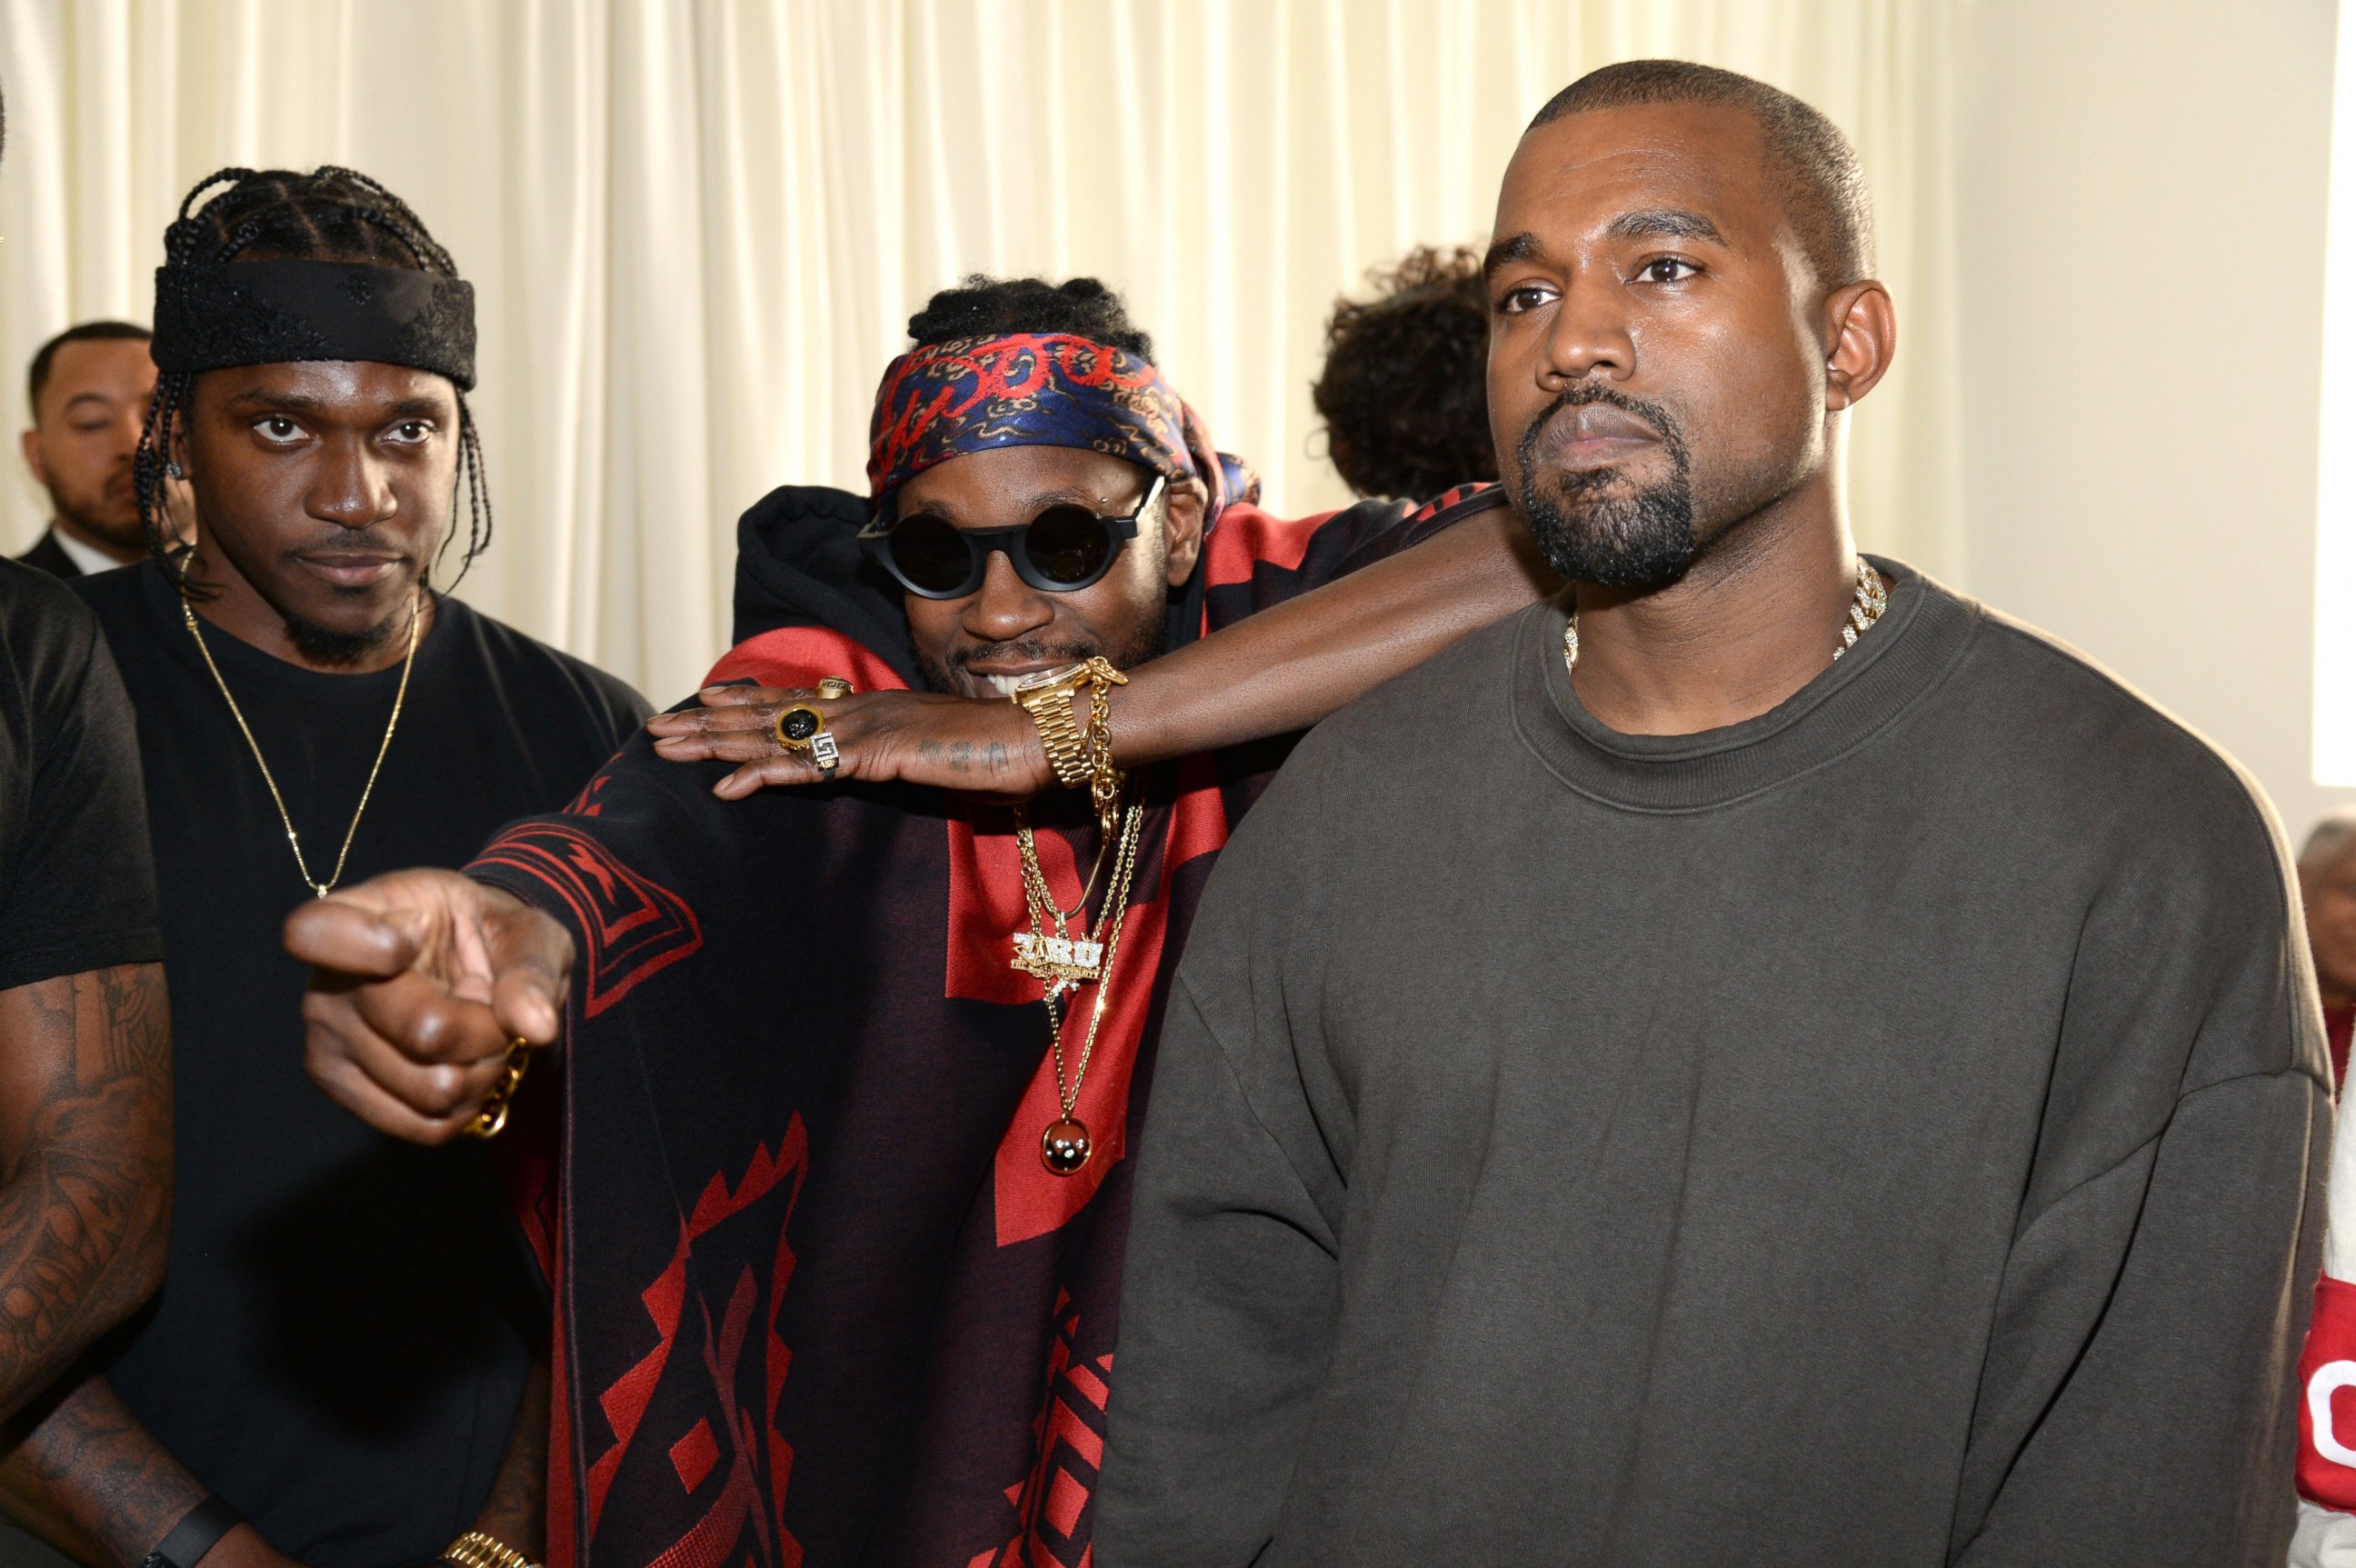 PHOTO: 2 Chainz and Kanye West attend Kanye West Yeezy Season 2 during New York Fashion Week at Skylight Modern, Sept. 16, 2015, in New York City. 